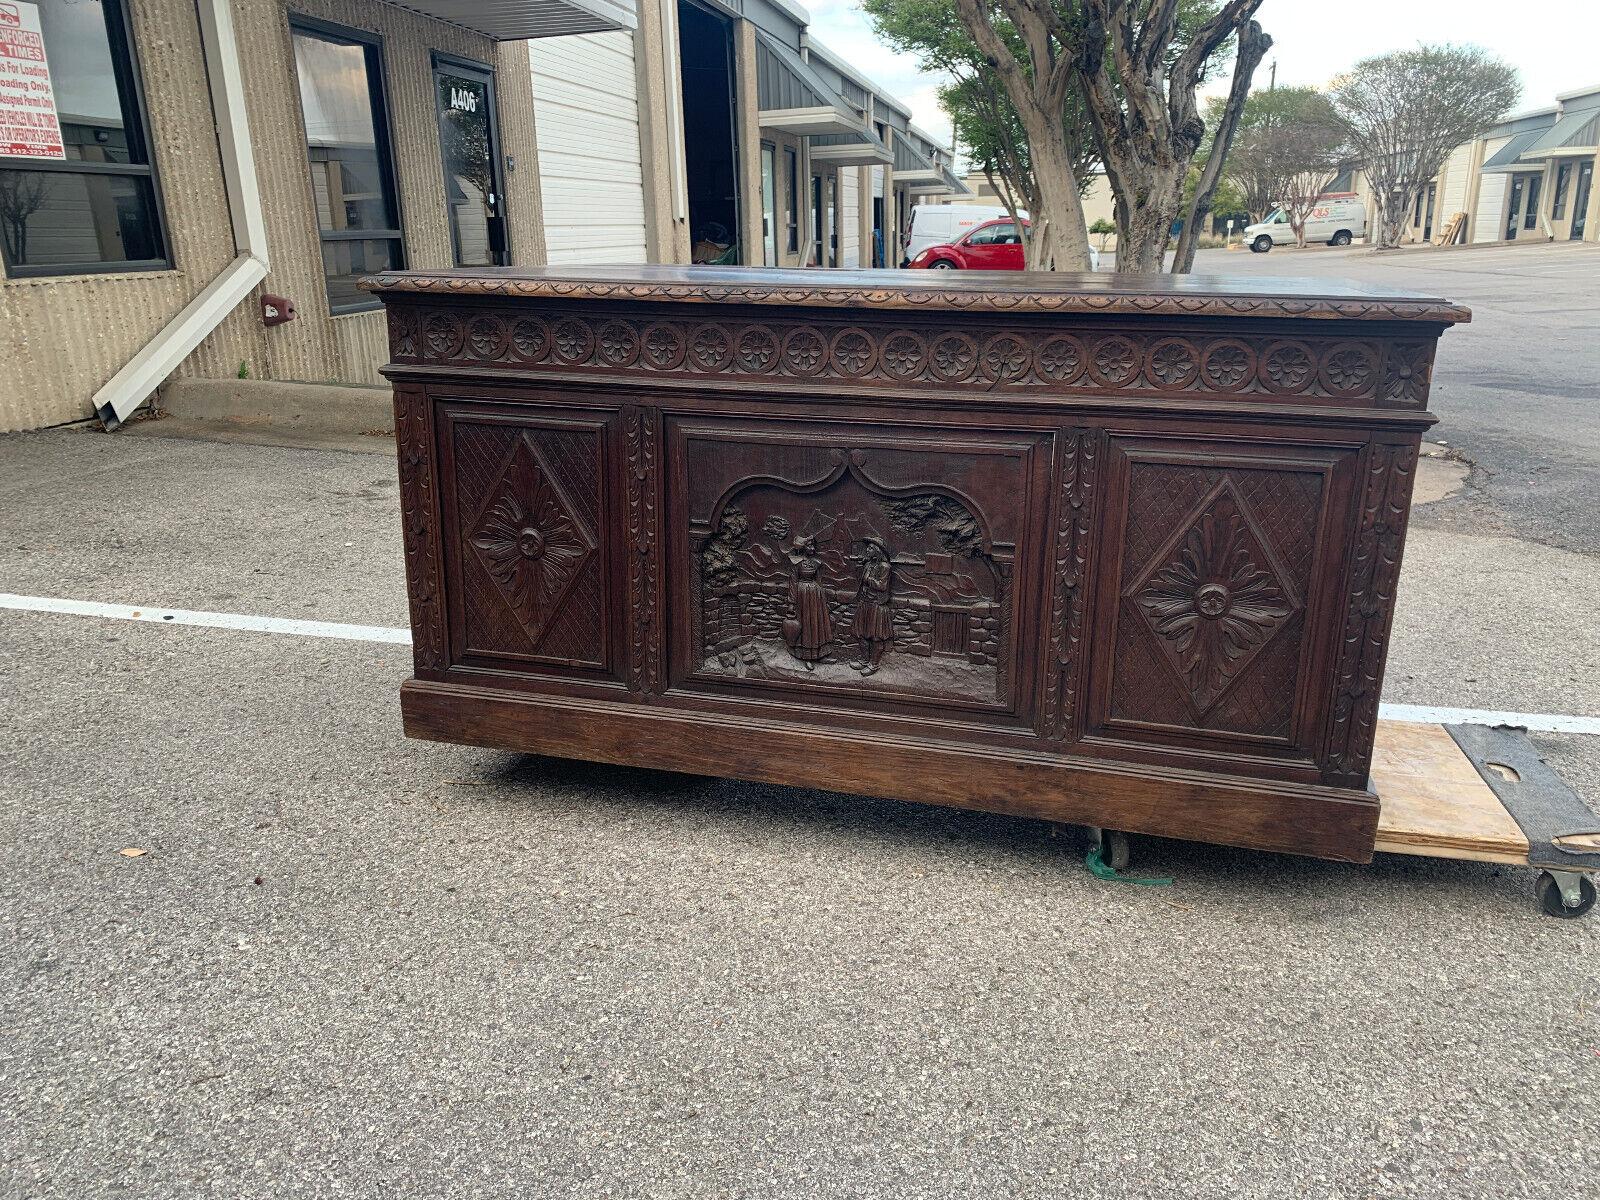 Antique Desk, Breton, Highly Carved, Rare, 6 Drawers, French, 19th C, 1800s!!
Gorgeous Antique Desk, Breton. Highly Carved, Rare, 6 Drawers, French, 19th C, 1800s!!

This antique desk is a highly carved Breton piece from the 1800s. It features six